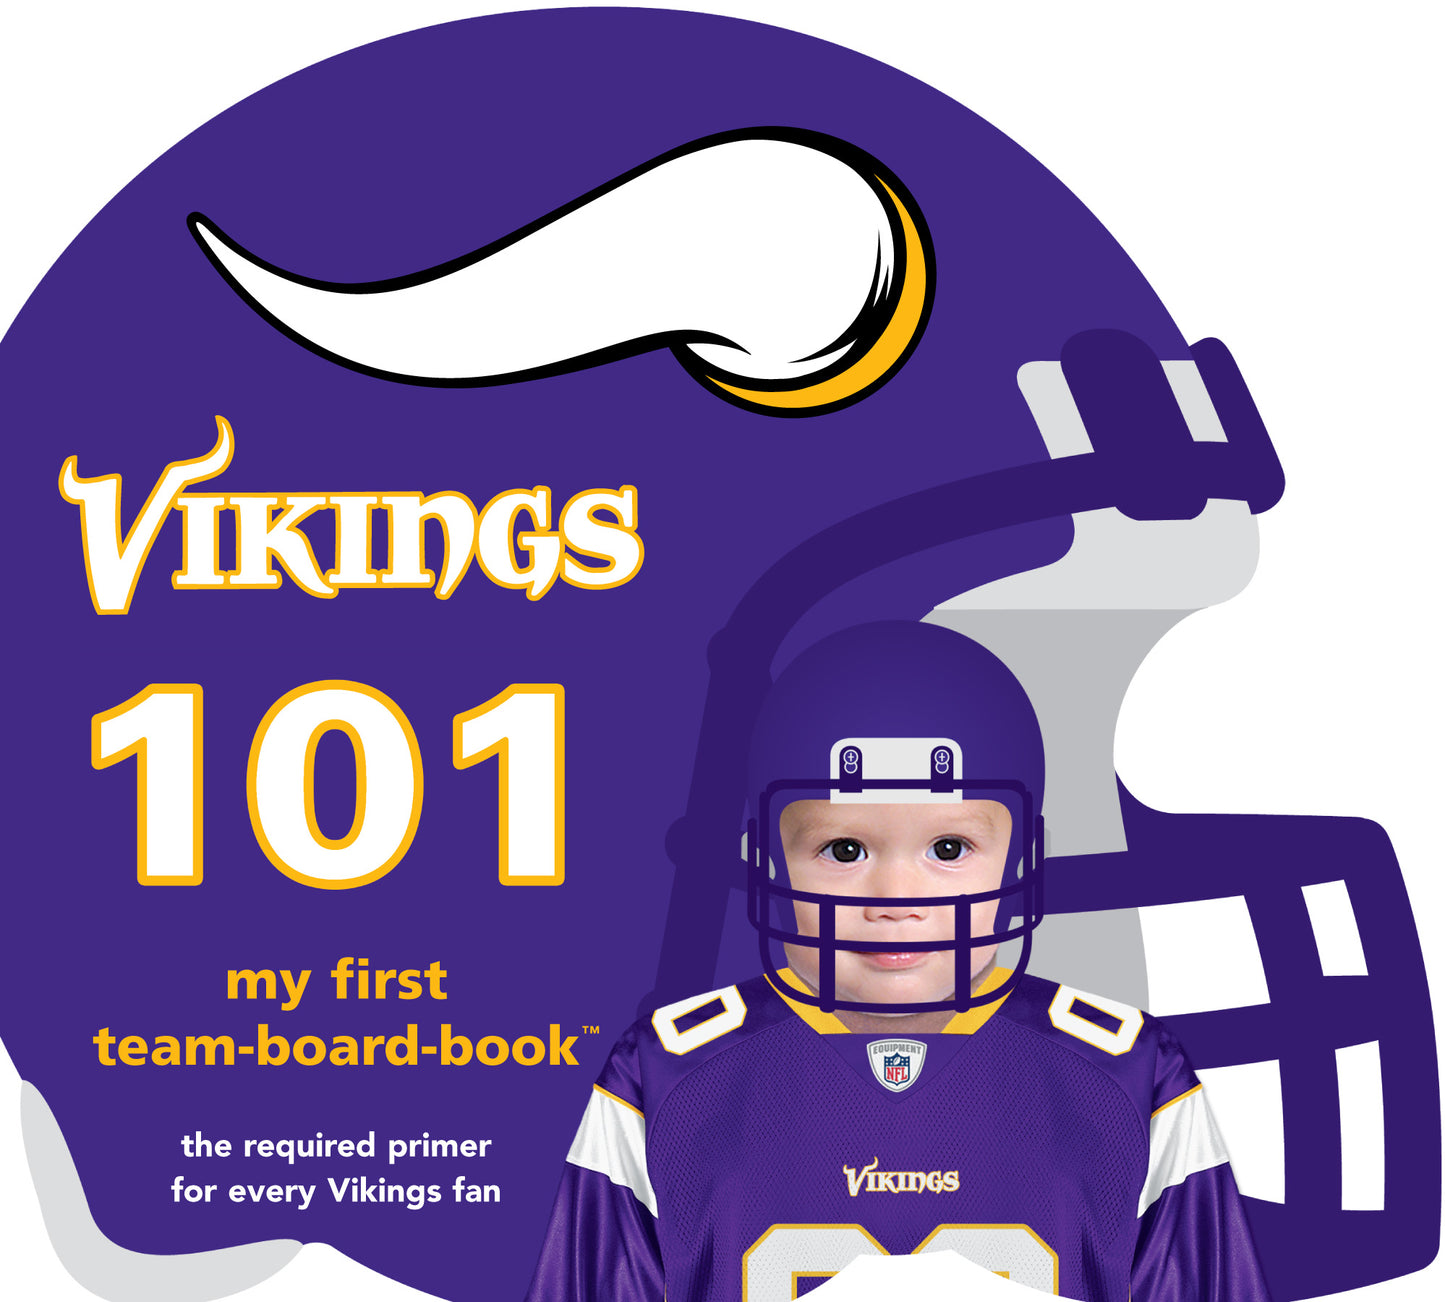 Minnesota Vikings licensed NFL Gift Set-Book with Rally Paper